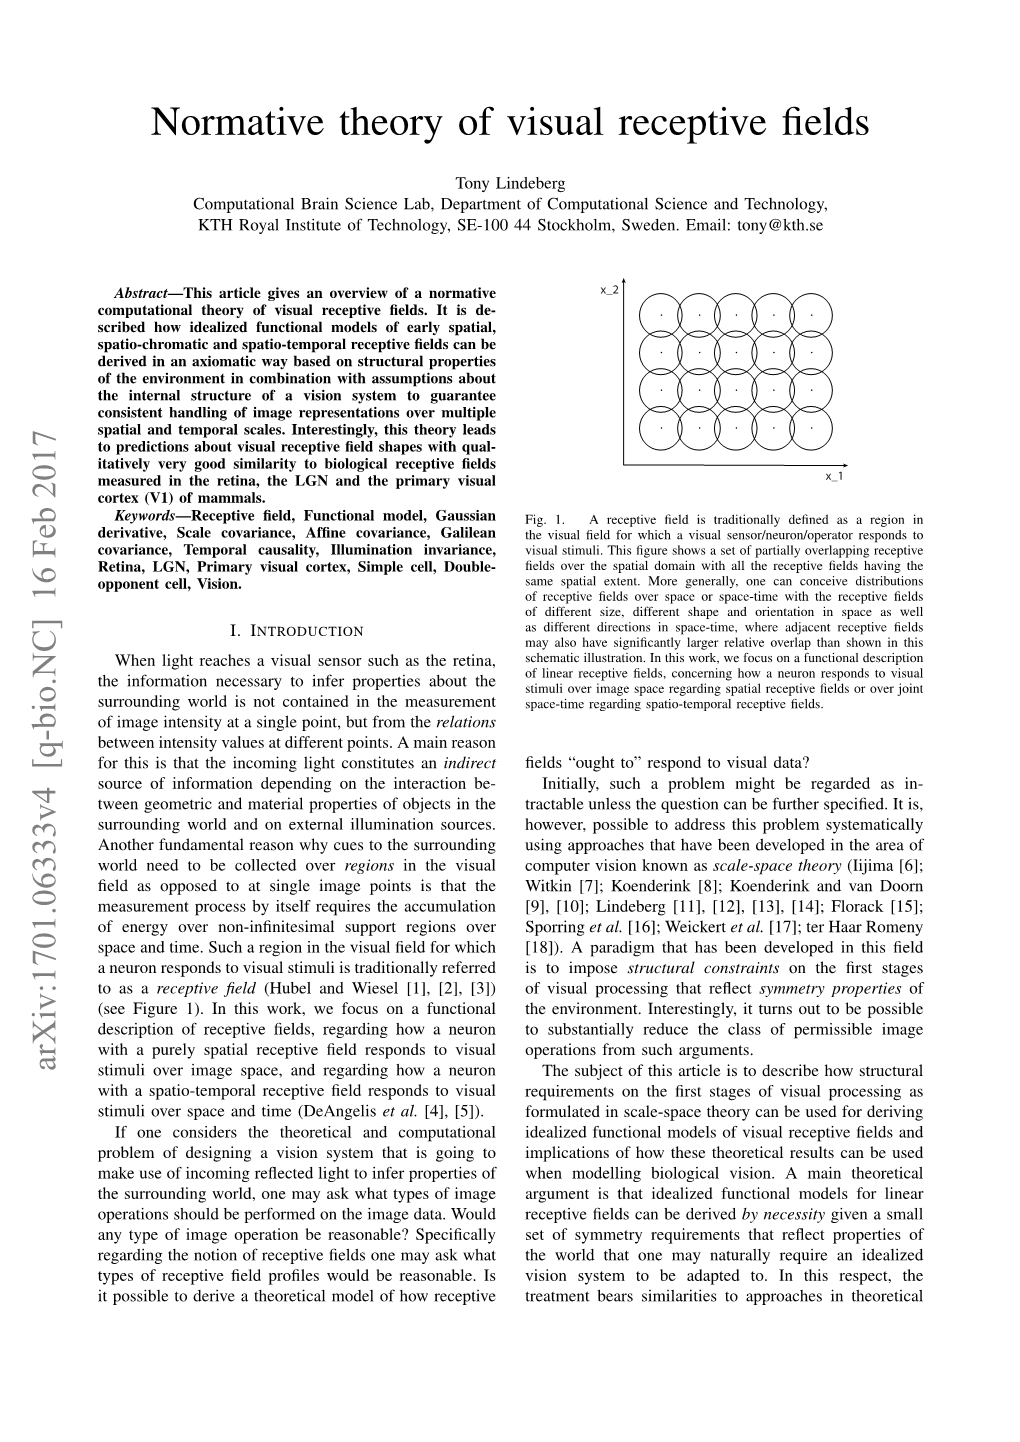 Normative Theory of Visual Receptive Fields